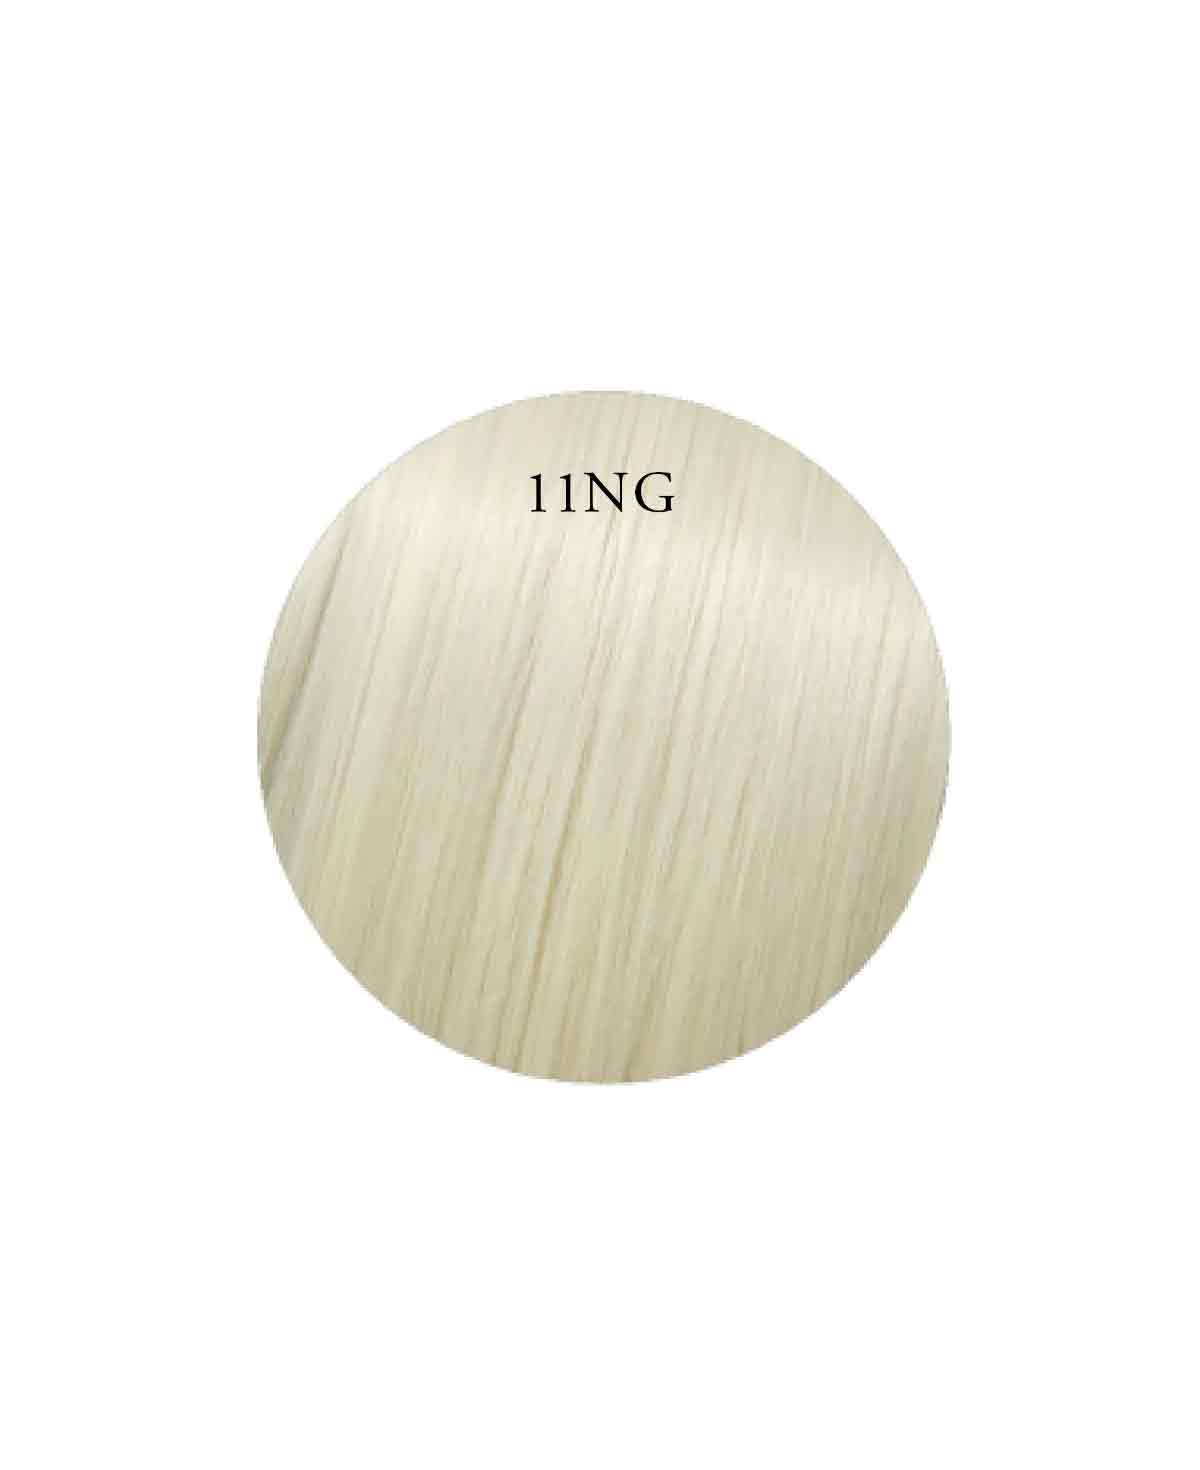 45-50cm (20") TAPE EXTENSIONS - SILVER BLONDE - 11NG